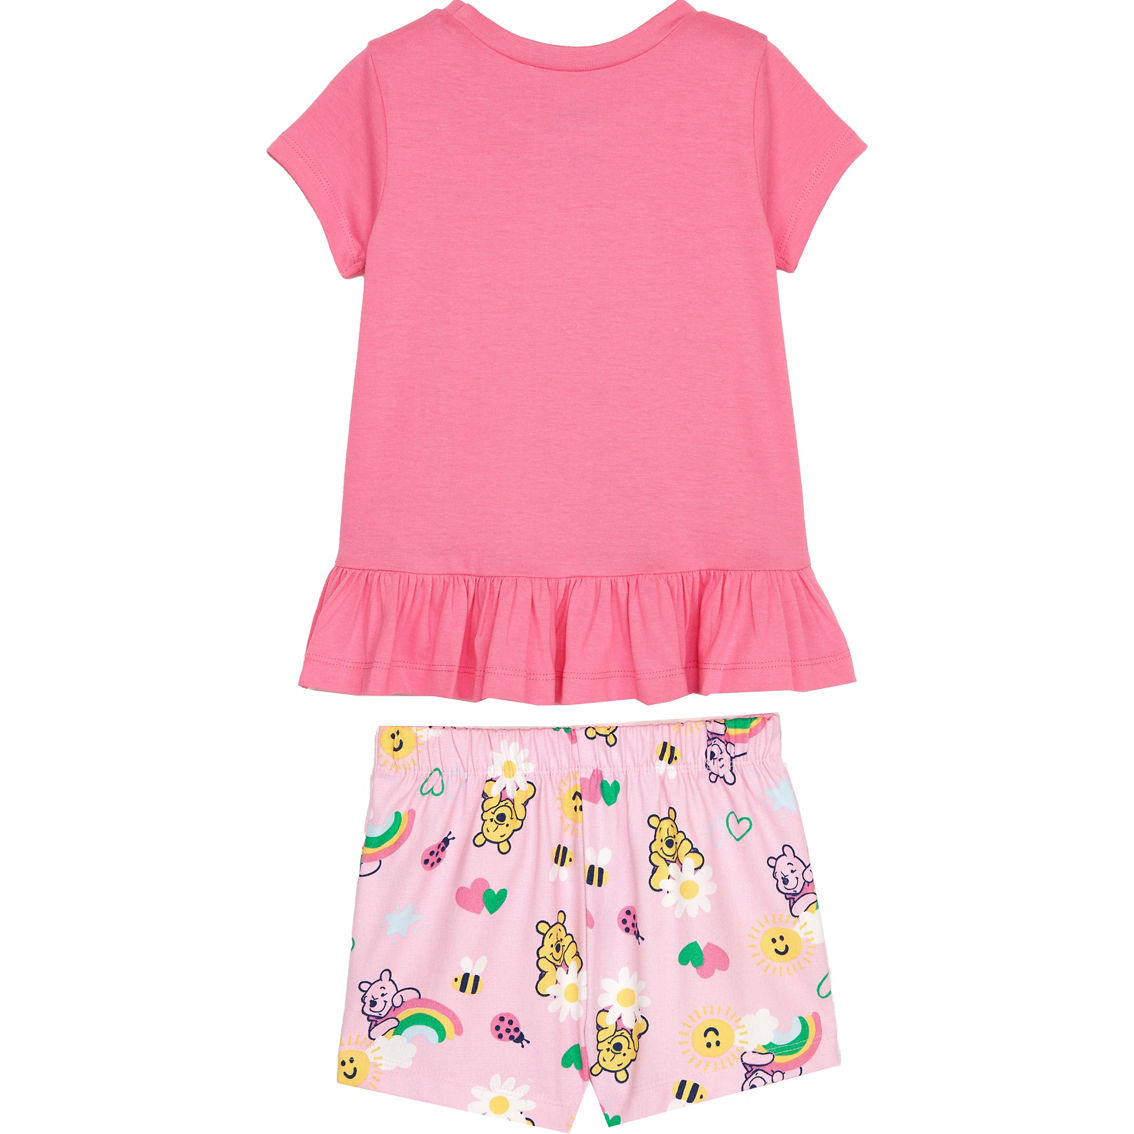 Disney Toddler Girls Winnie The Pooh Jersey Top and Twill Shorts 2 pc. Set - Image 2 of 2